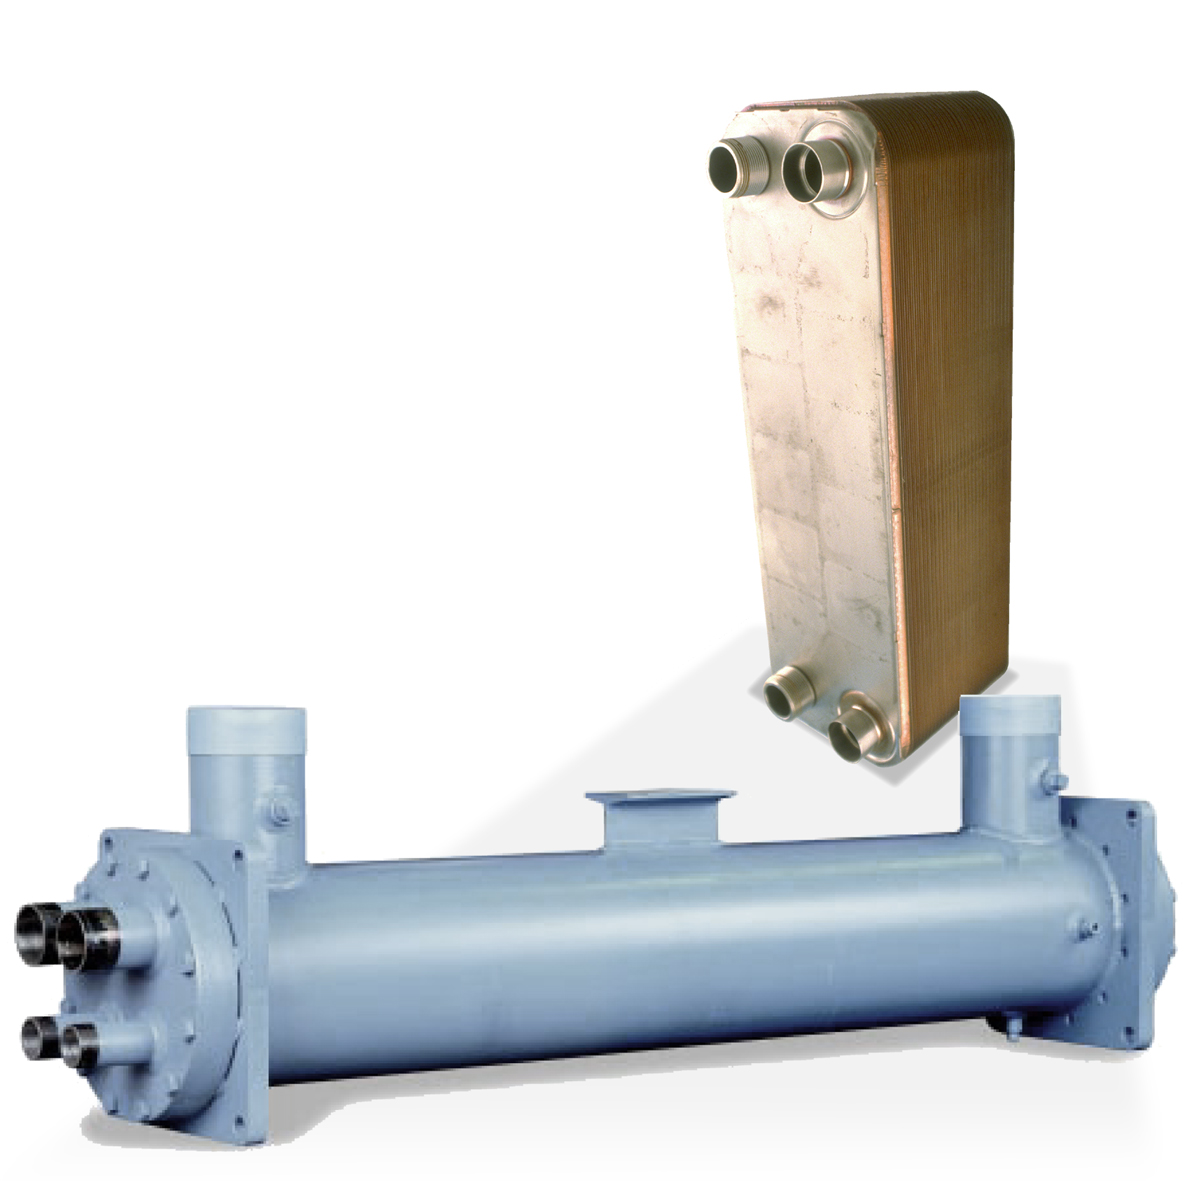 Evaporators commonly used on Advantage process chillers